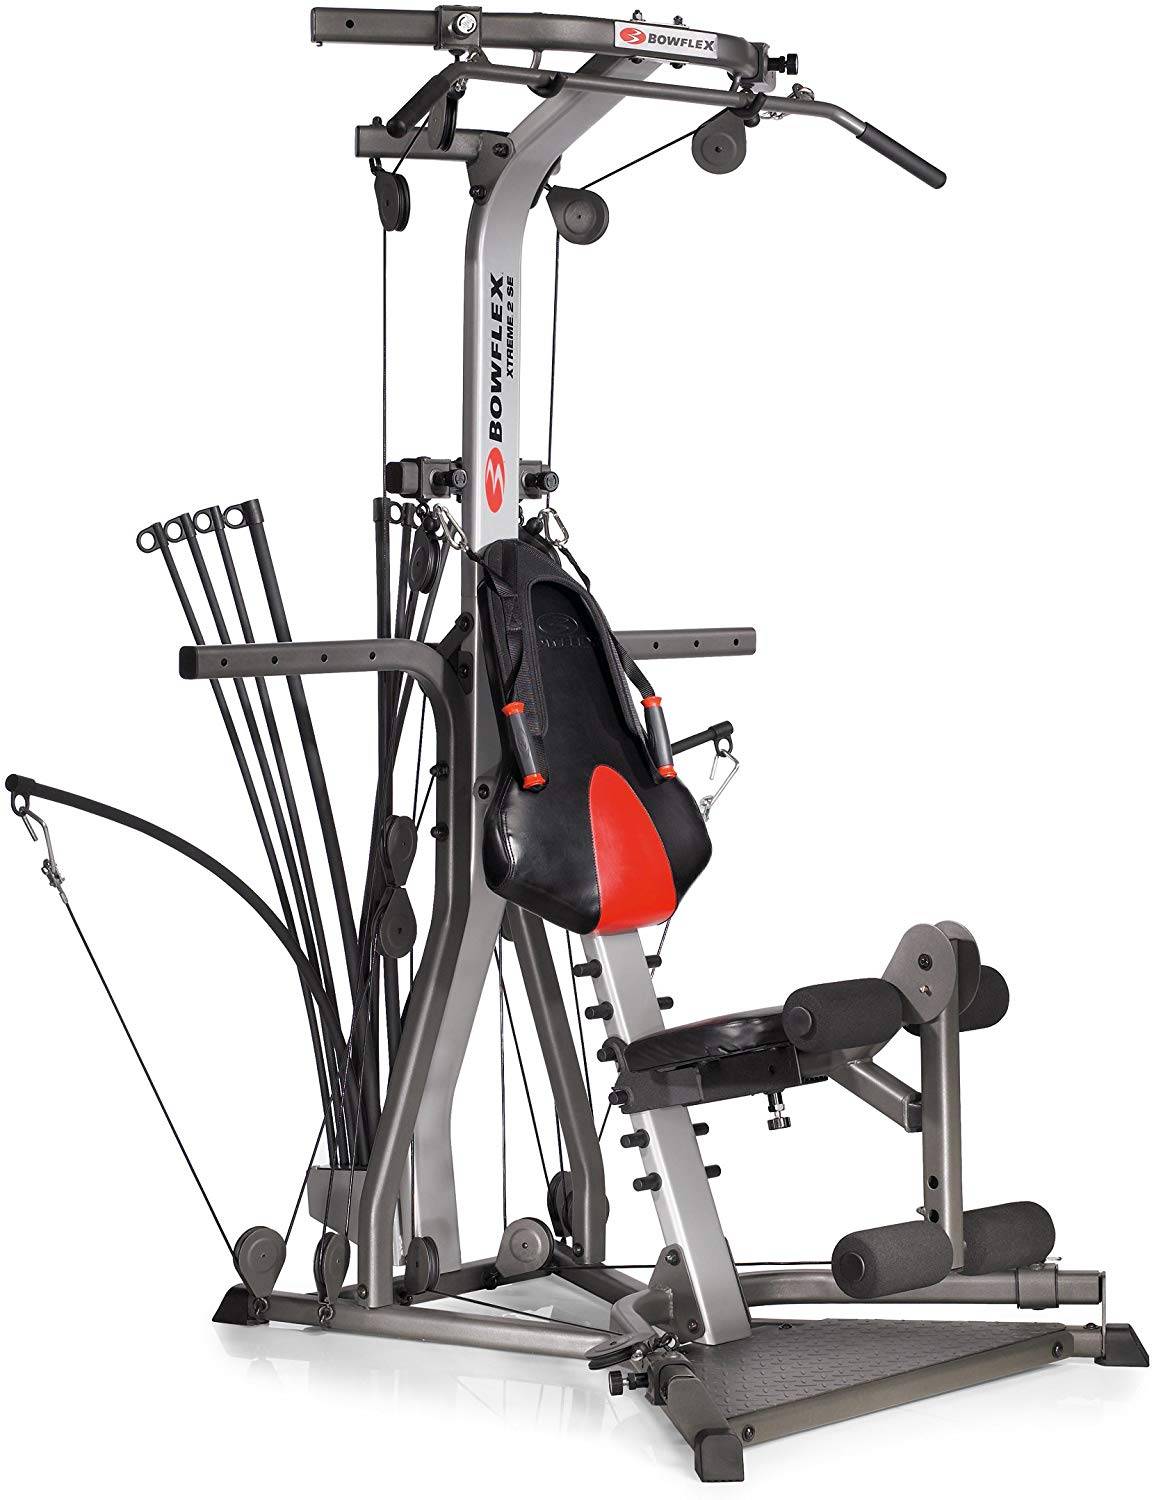 Simple Home Gym Equipment Canada Online for push your ABS